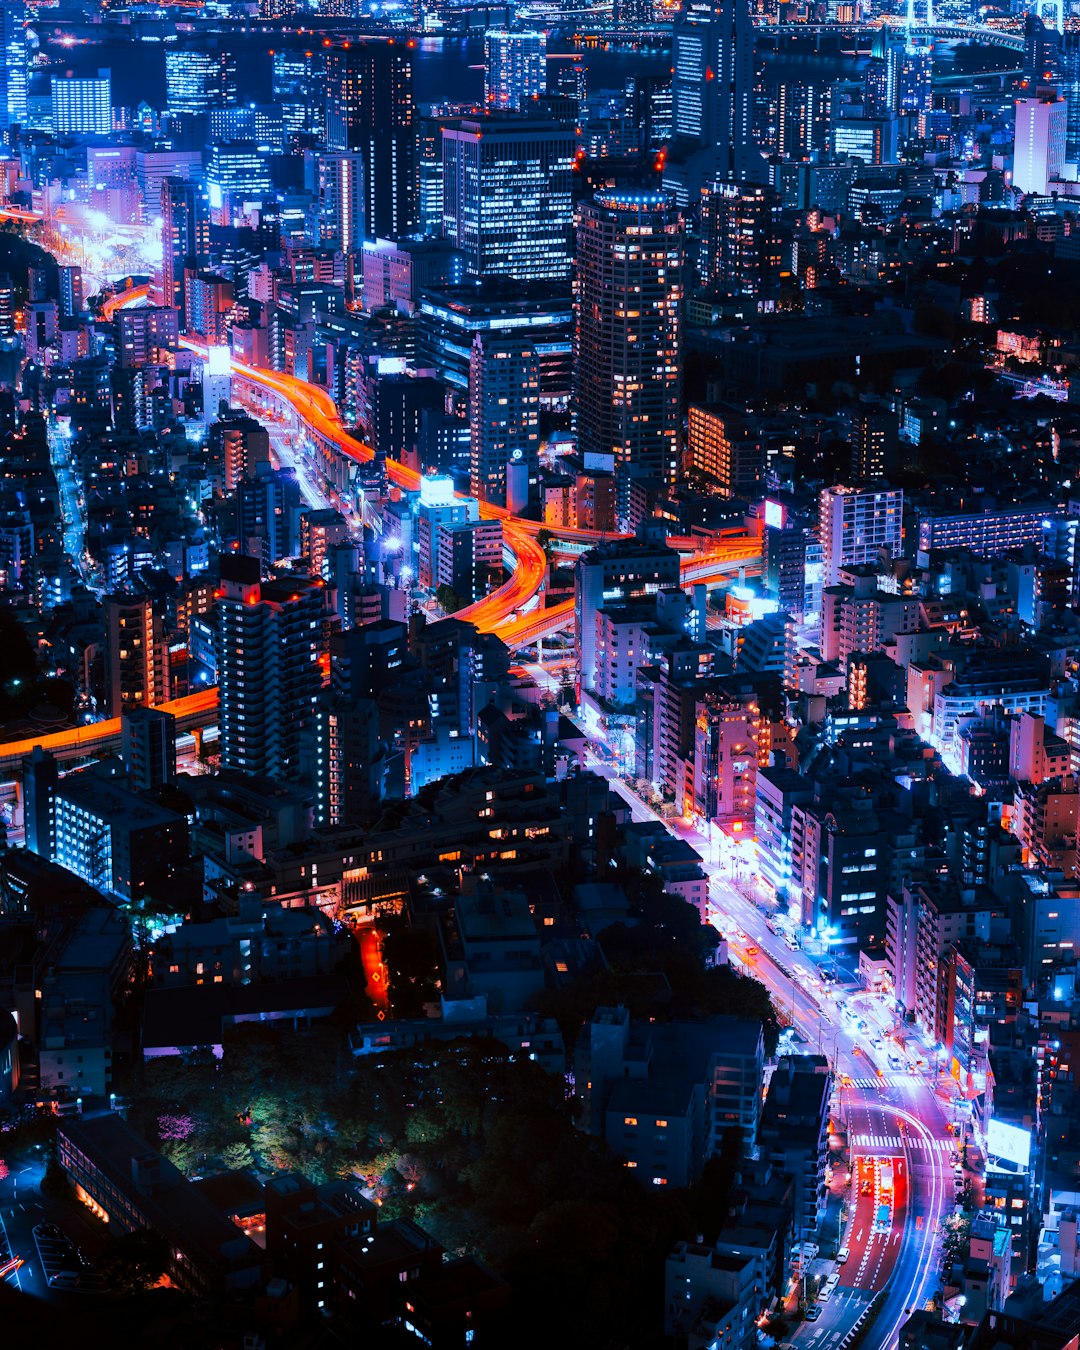 Night view of Tokyo, Japan, bird’s eye view, city lights, highrise buildings and streets illuminated with neon signs, cars moving on the highway below, colorful lights reflecting off skyscrapers, creating an atmosphere of bustling urban life, vibrant blue tones in the night sky, in the style of photography, wideangle lens capturing vastness, high resolution. –ar 51:64